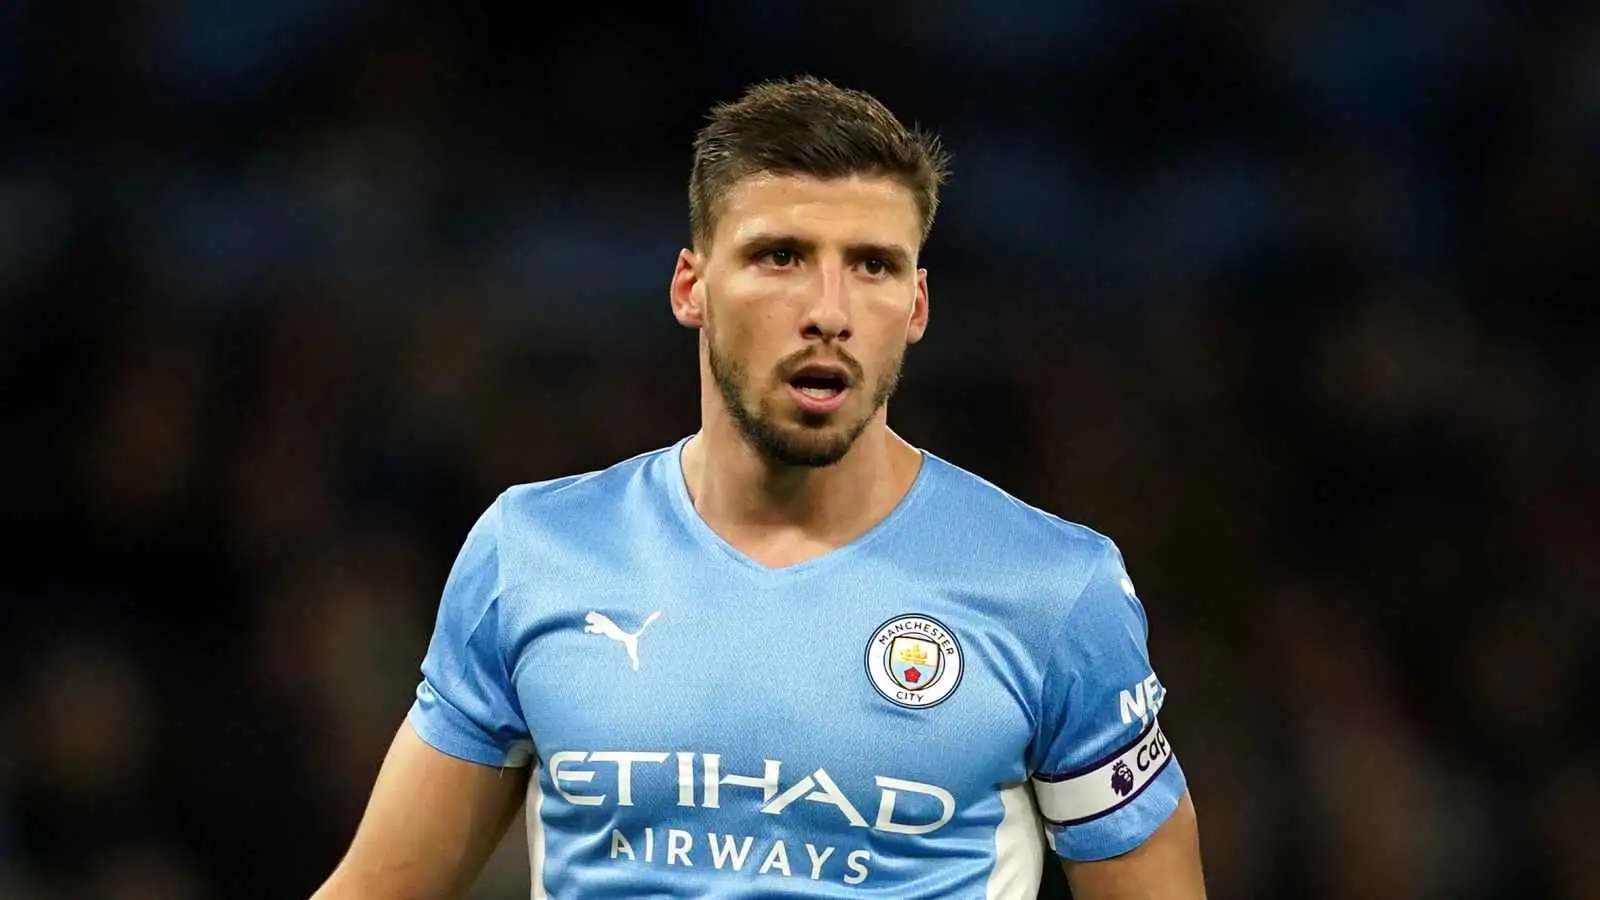 Ruben Dias one of three Man City defenders out for the season, Guardiola confirms